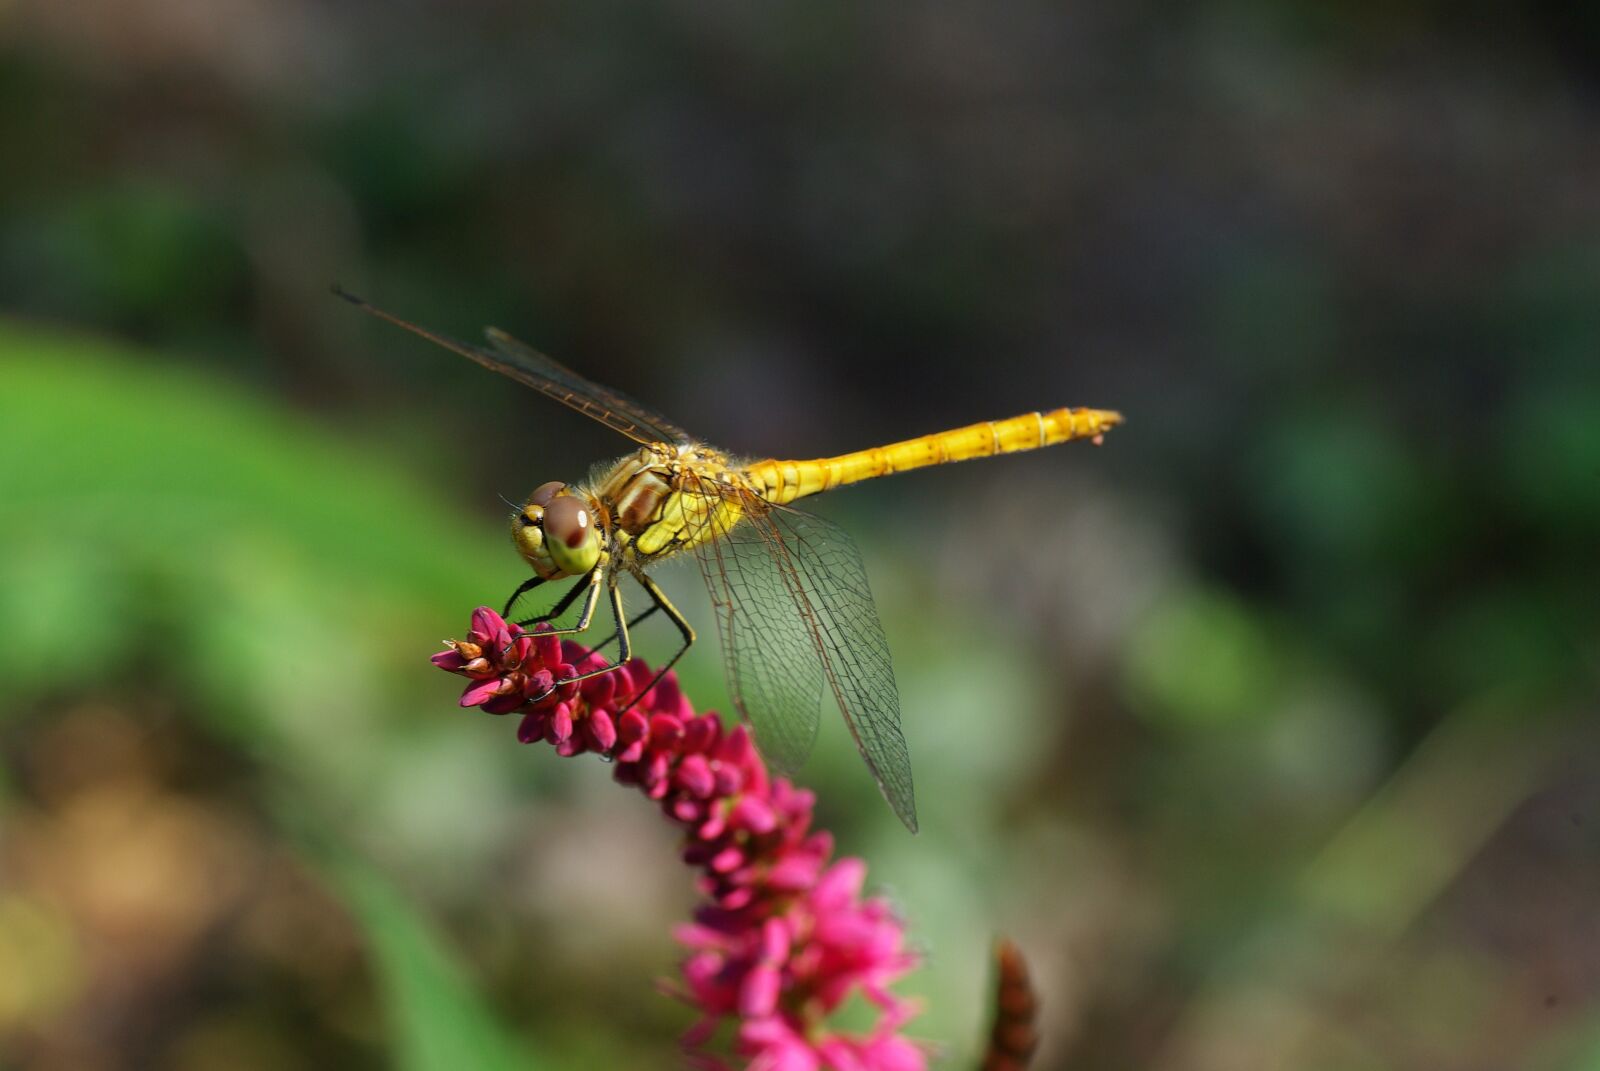 Pentax K10D sample photo. Dragonfly, summer, nature photography